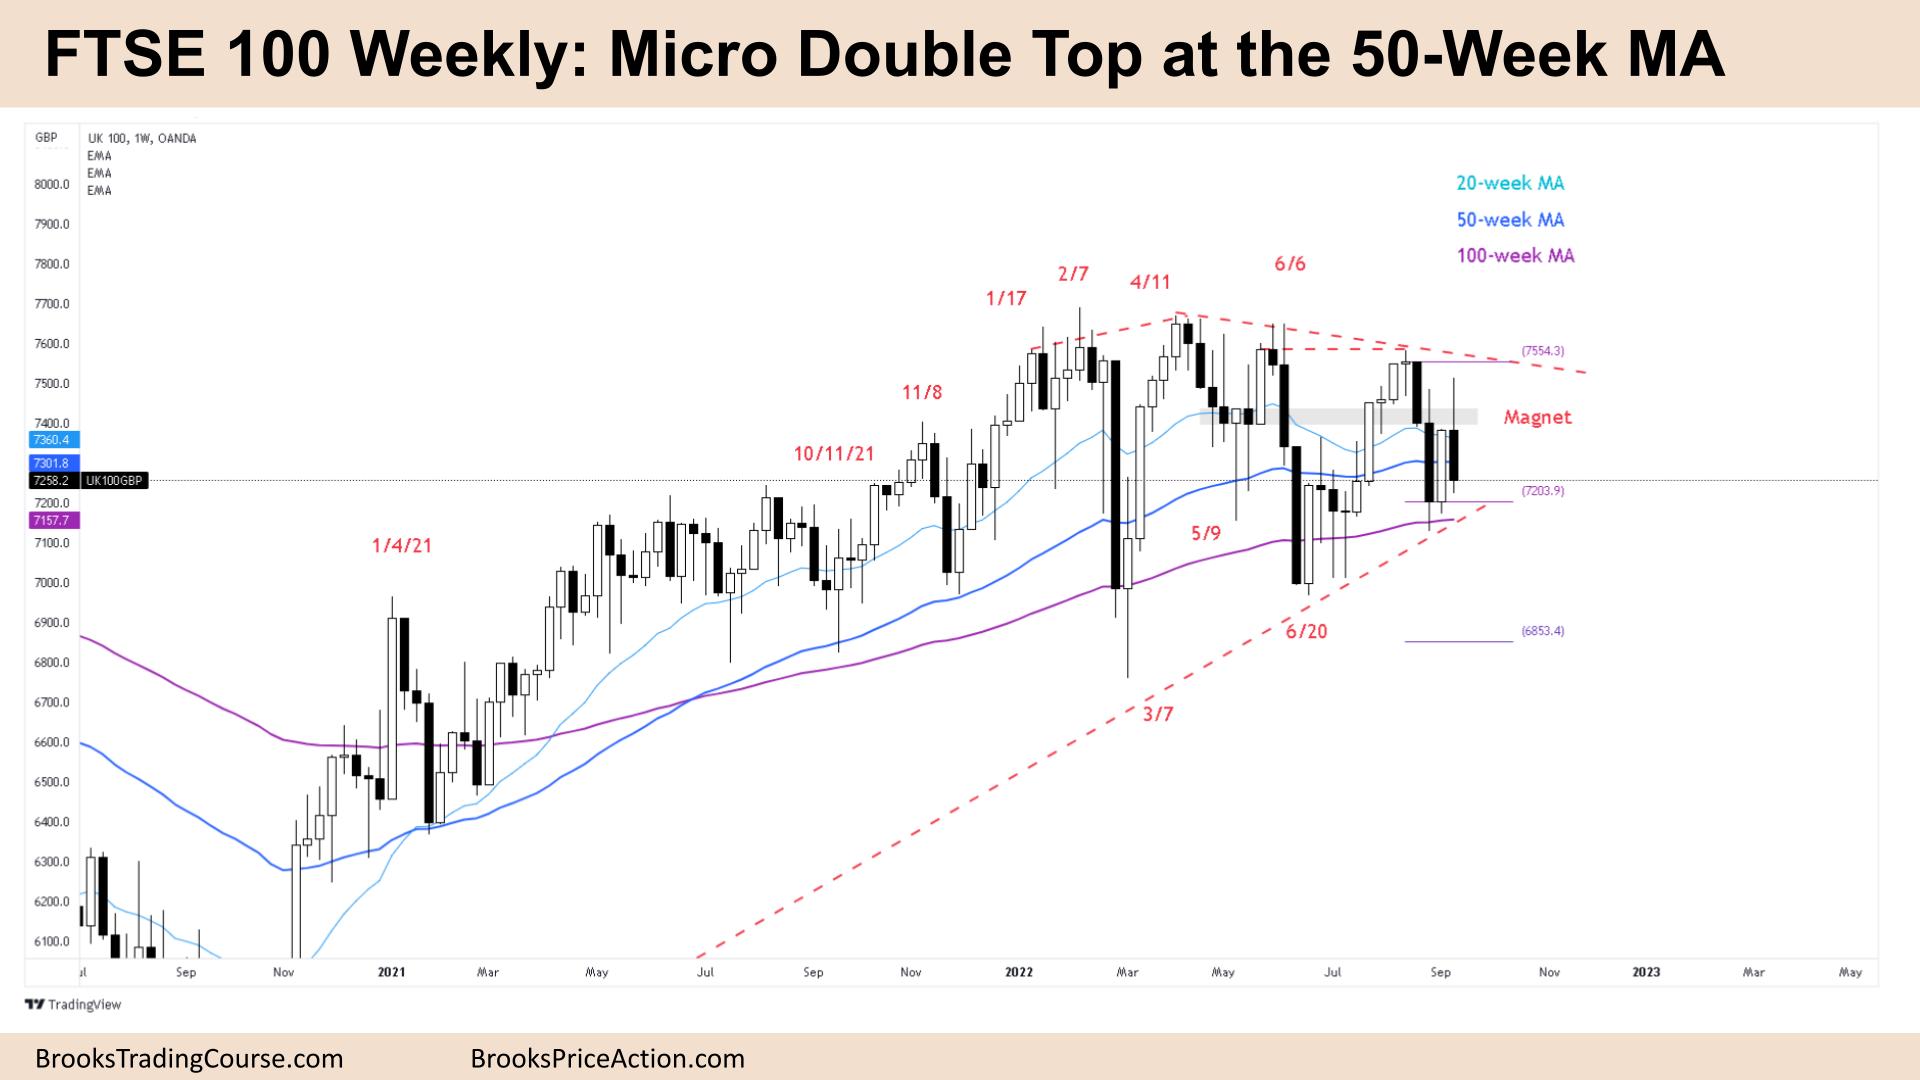 FTSE 100 Micro Double Top at the 50-Week MA